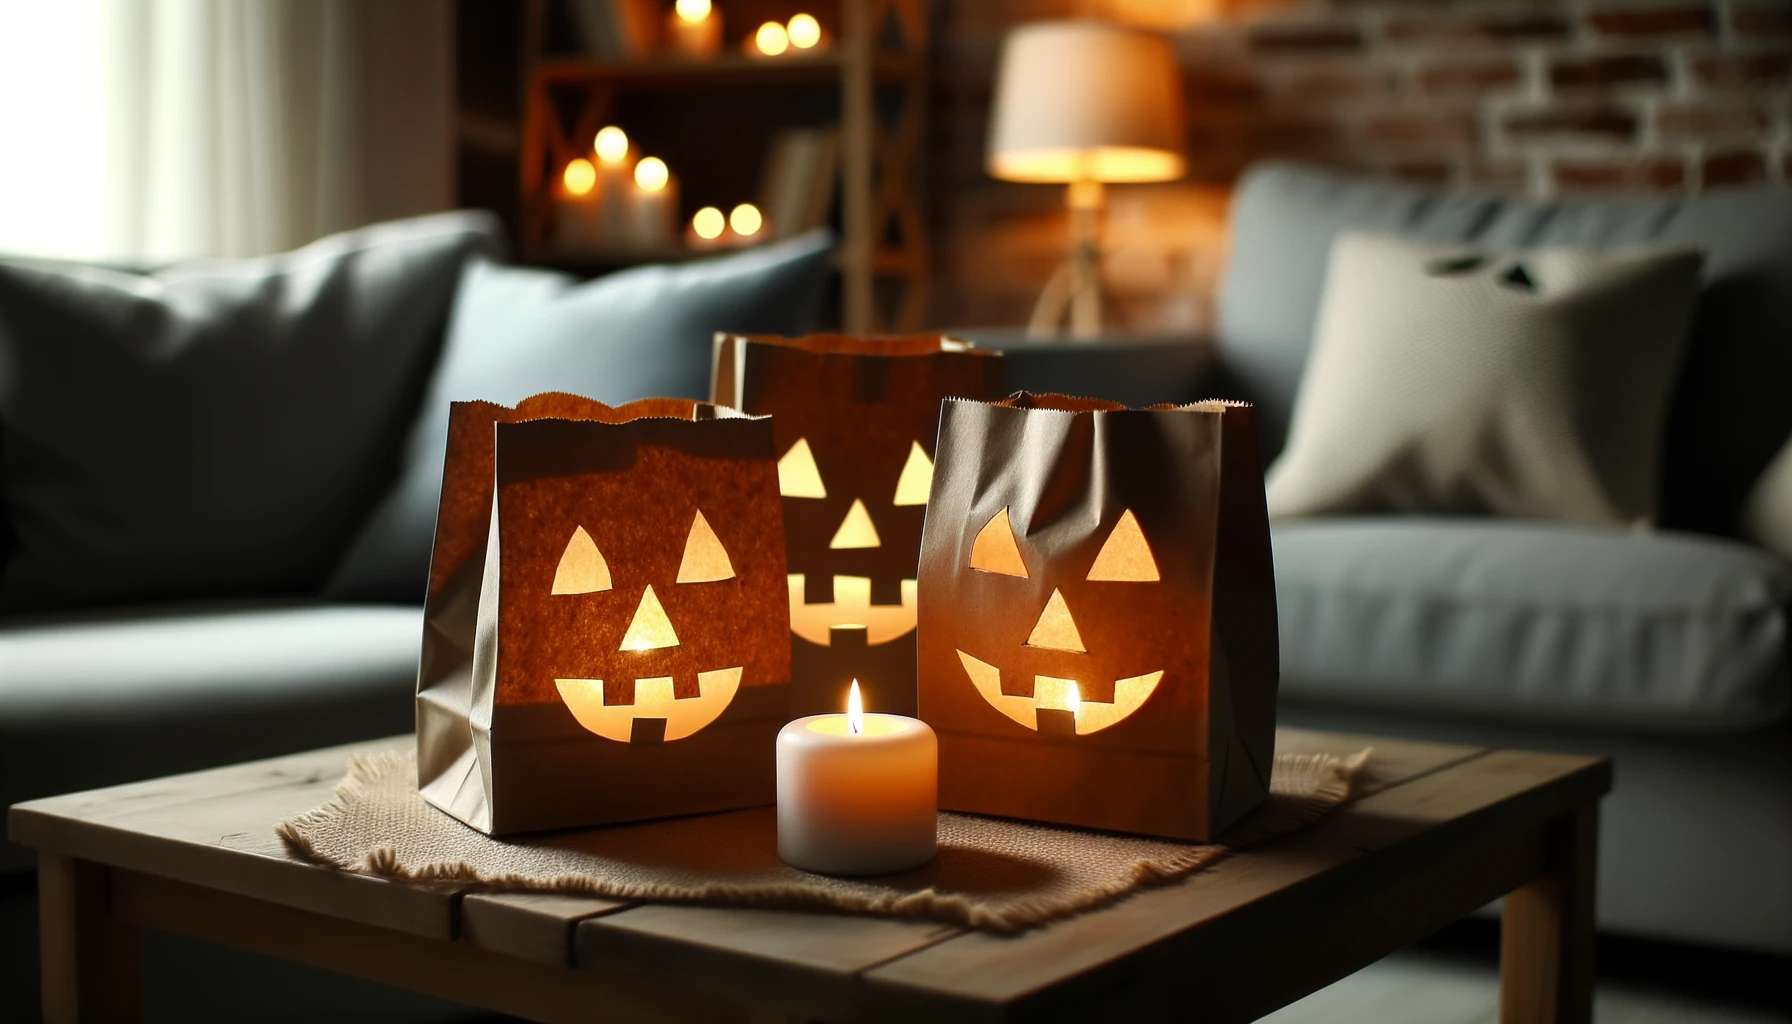 Living room scene with paper bag Jack O Lanterns arranged on a table. The bags emit a warm light from battery-powered candles within, highlighting an eco-friendly and kid-safe Halloween decoration.